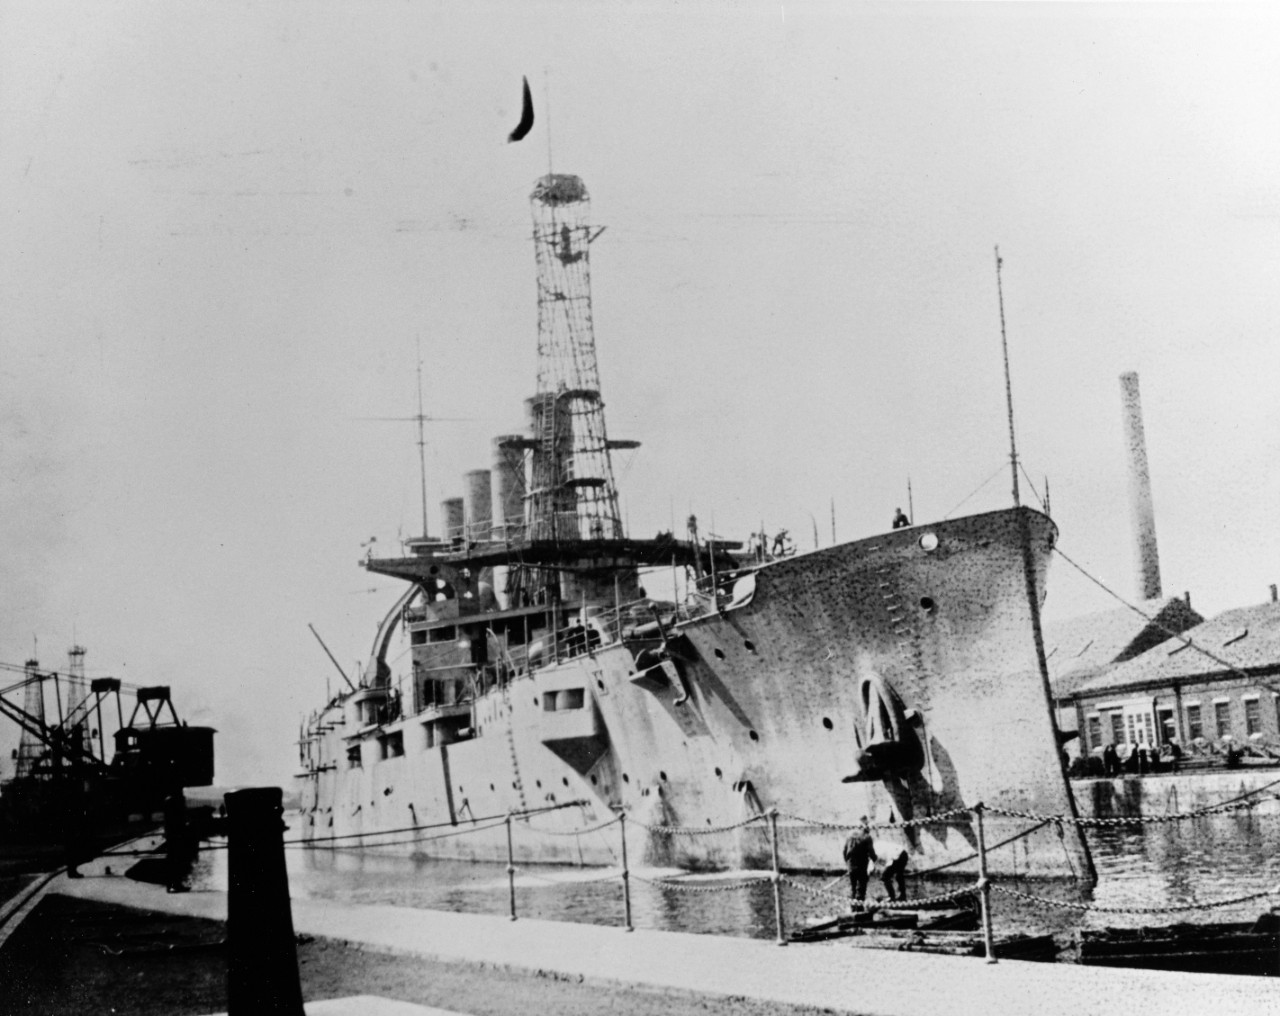 An armored cruiser - either USS North Carolina (ACR-12) or USS Montana (ACR-13) - in drydock at Portsmouth Navy Yard, New Hampshire, circa 1912-1914.